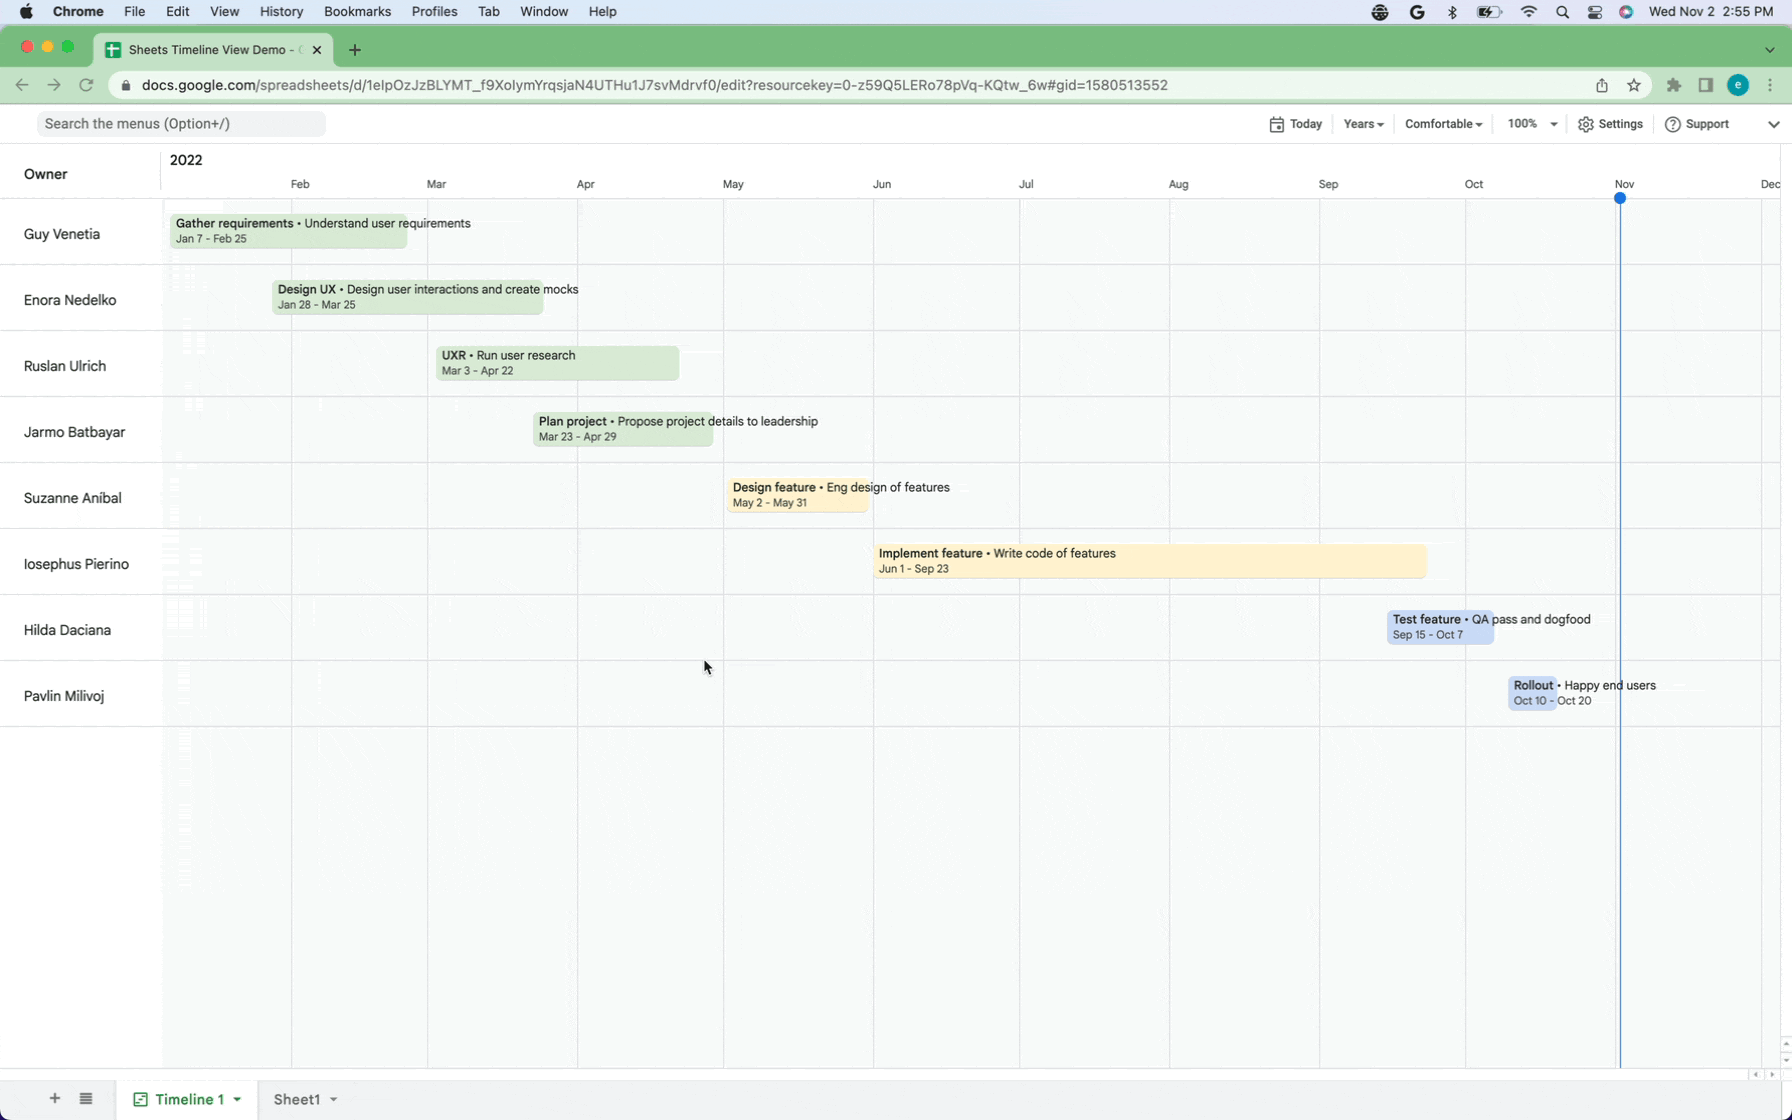 Google Sheets timeline view